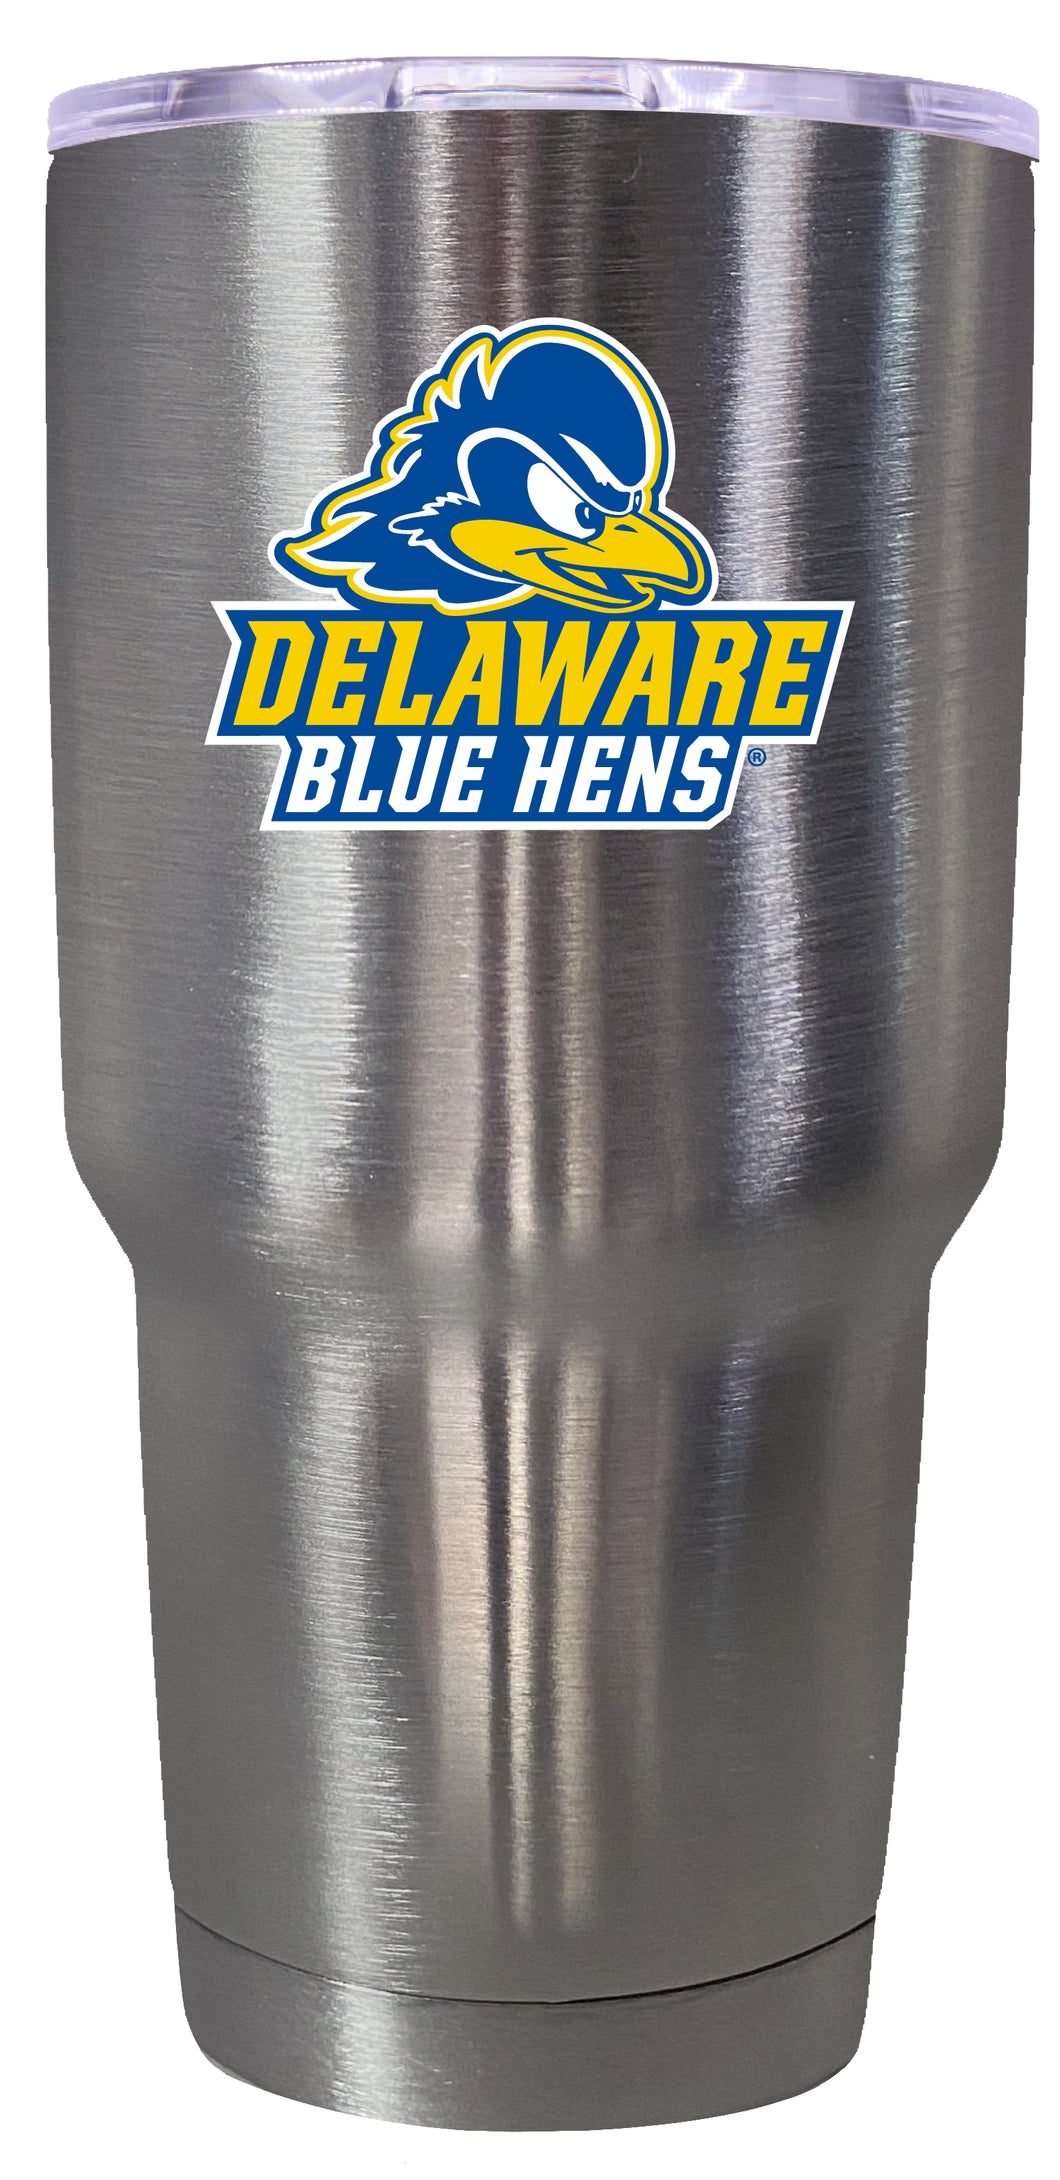 Delaware Blue Hens Mascot Logo Tumbler - 24oz Color-Choice Insulated Stainless Steel Mug